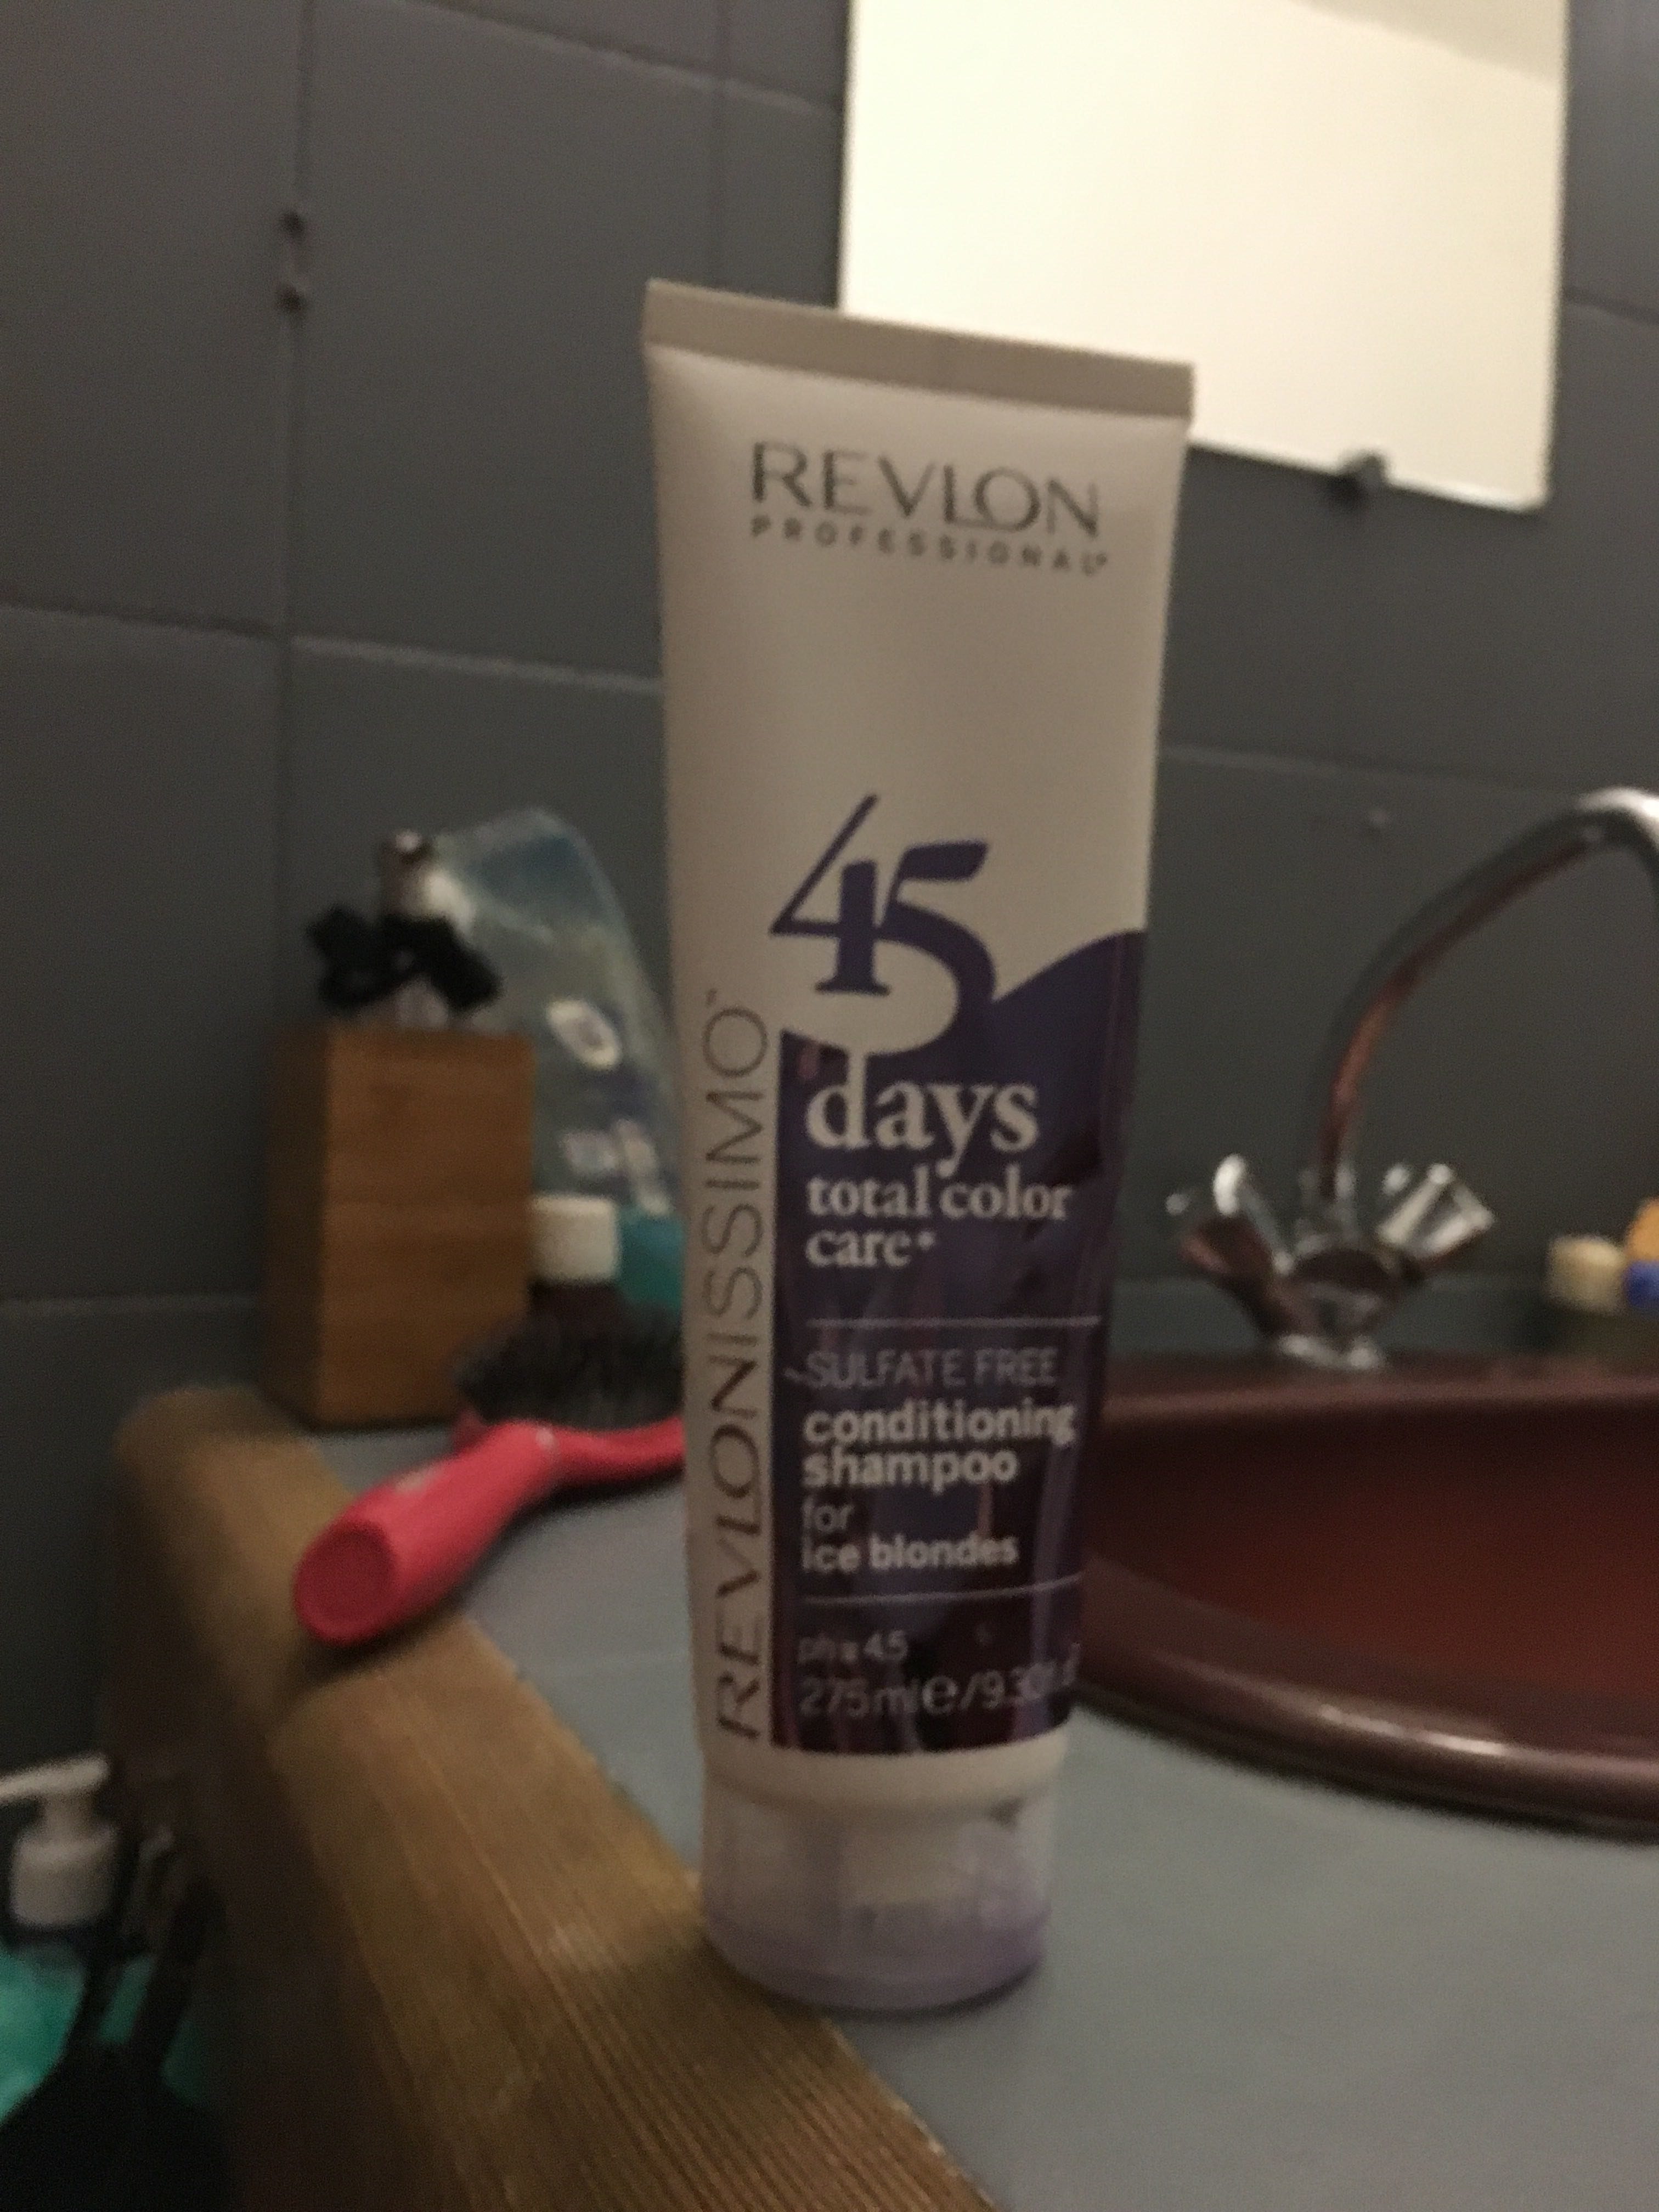 45 days total color care for ice blondes - 製品 - fr